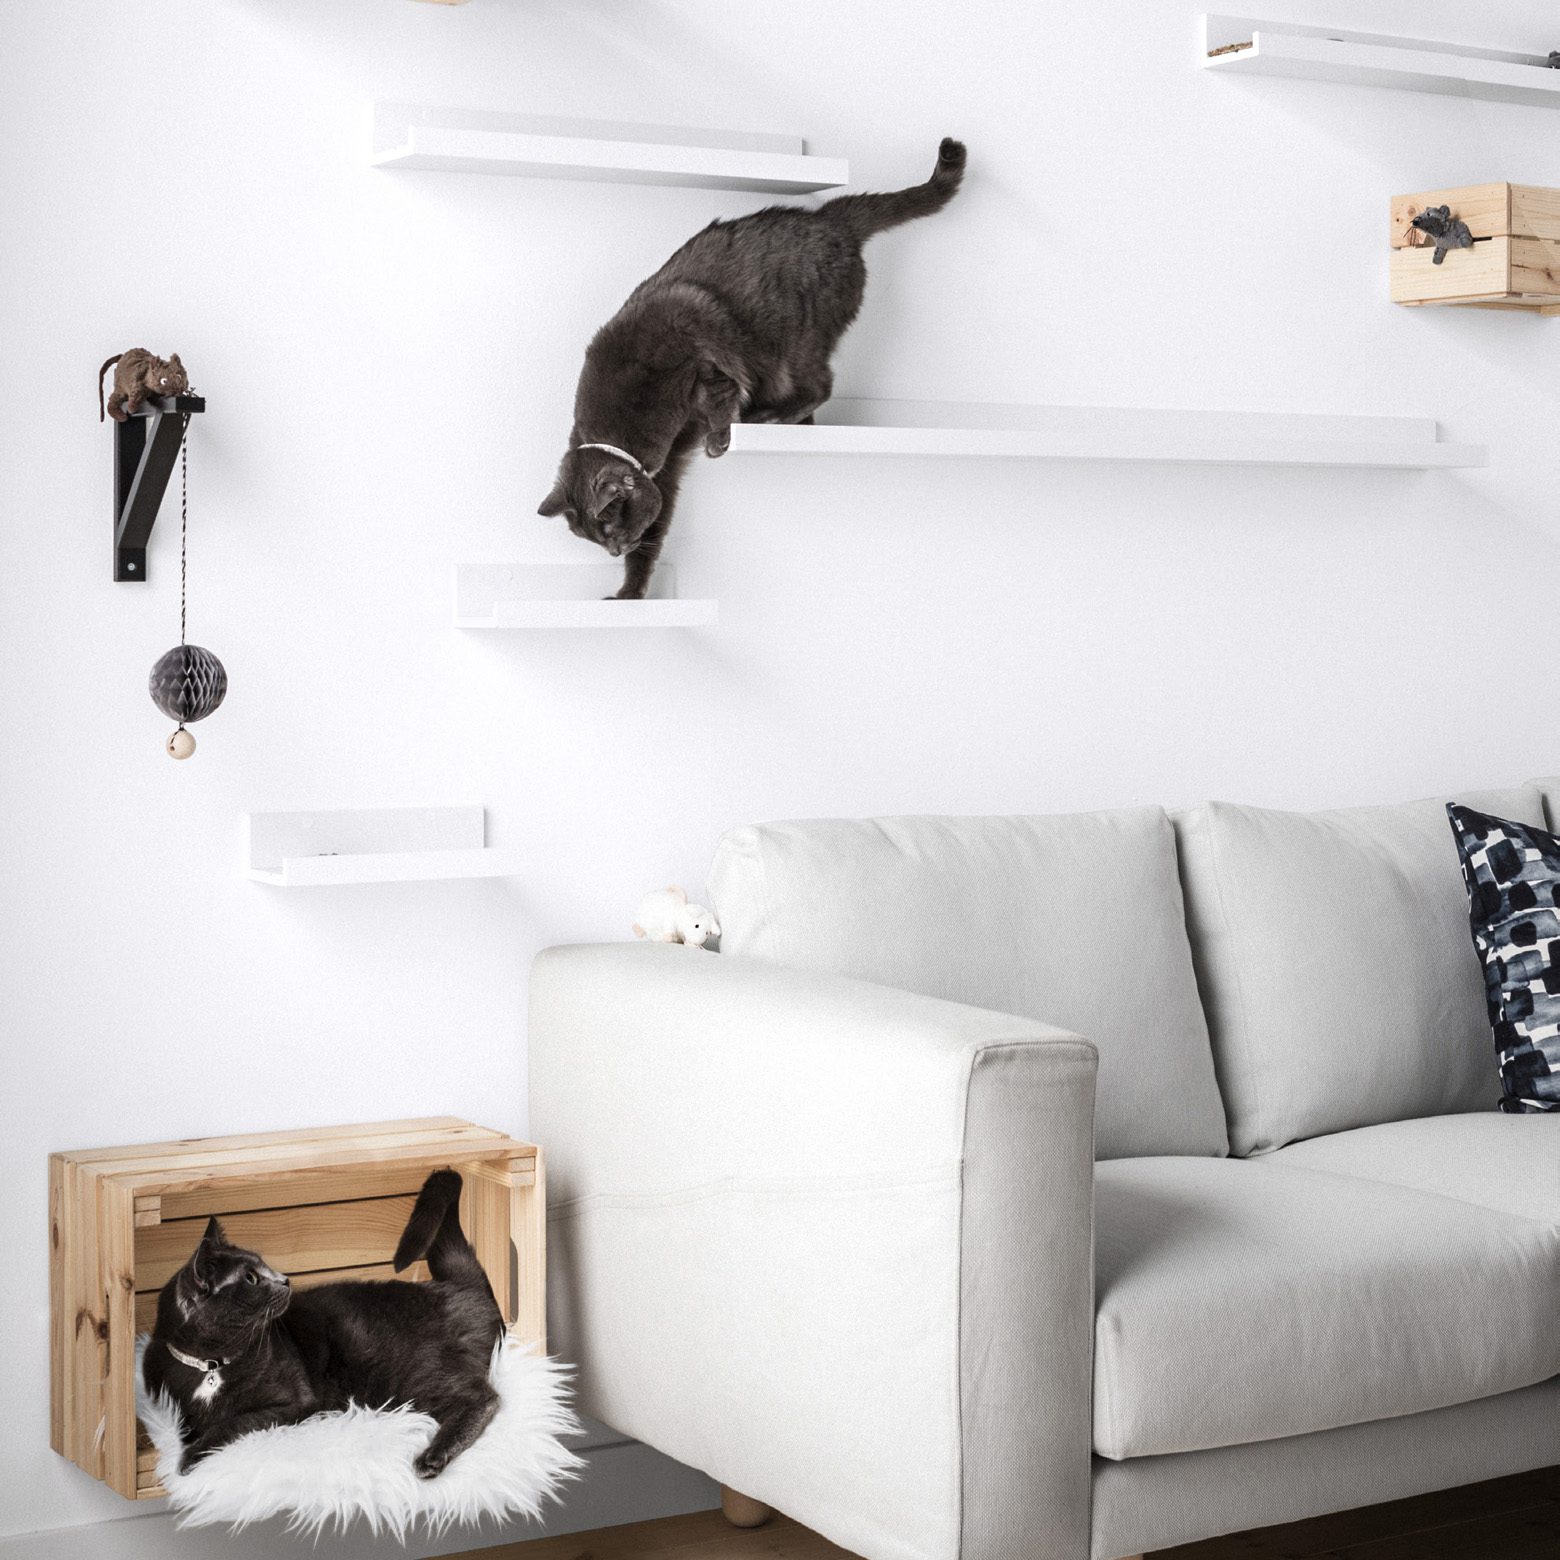 cats playing on floating shelves